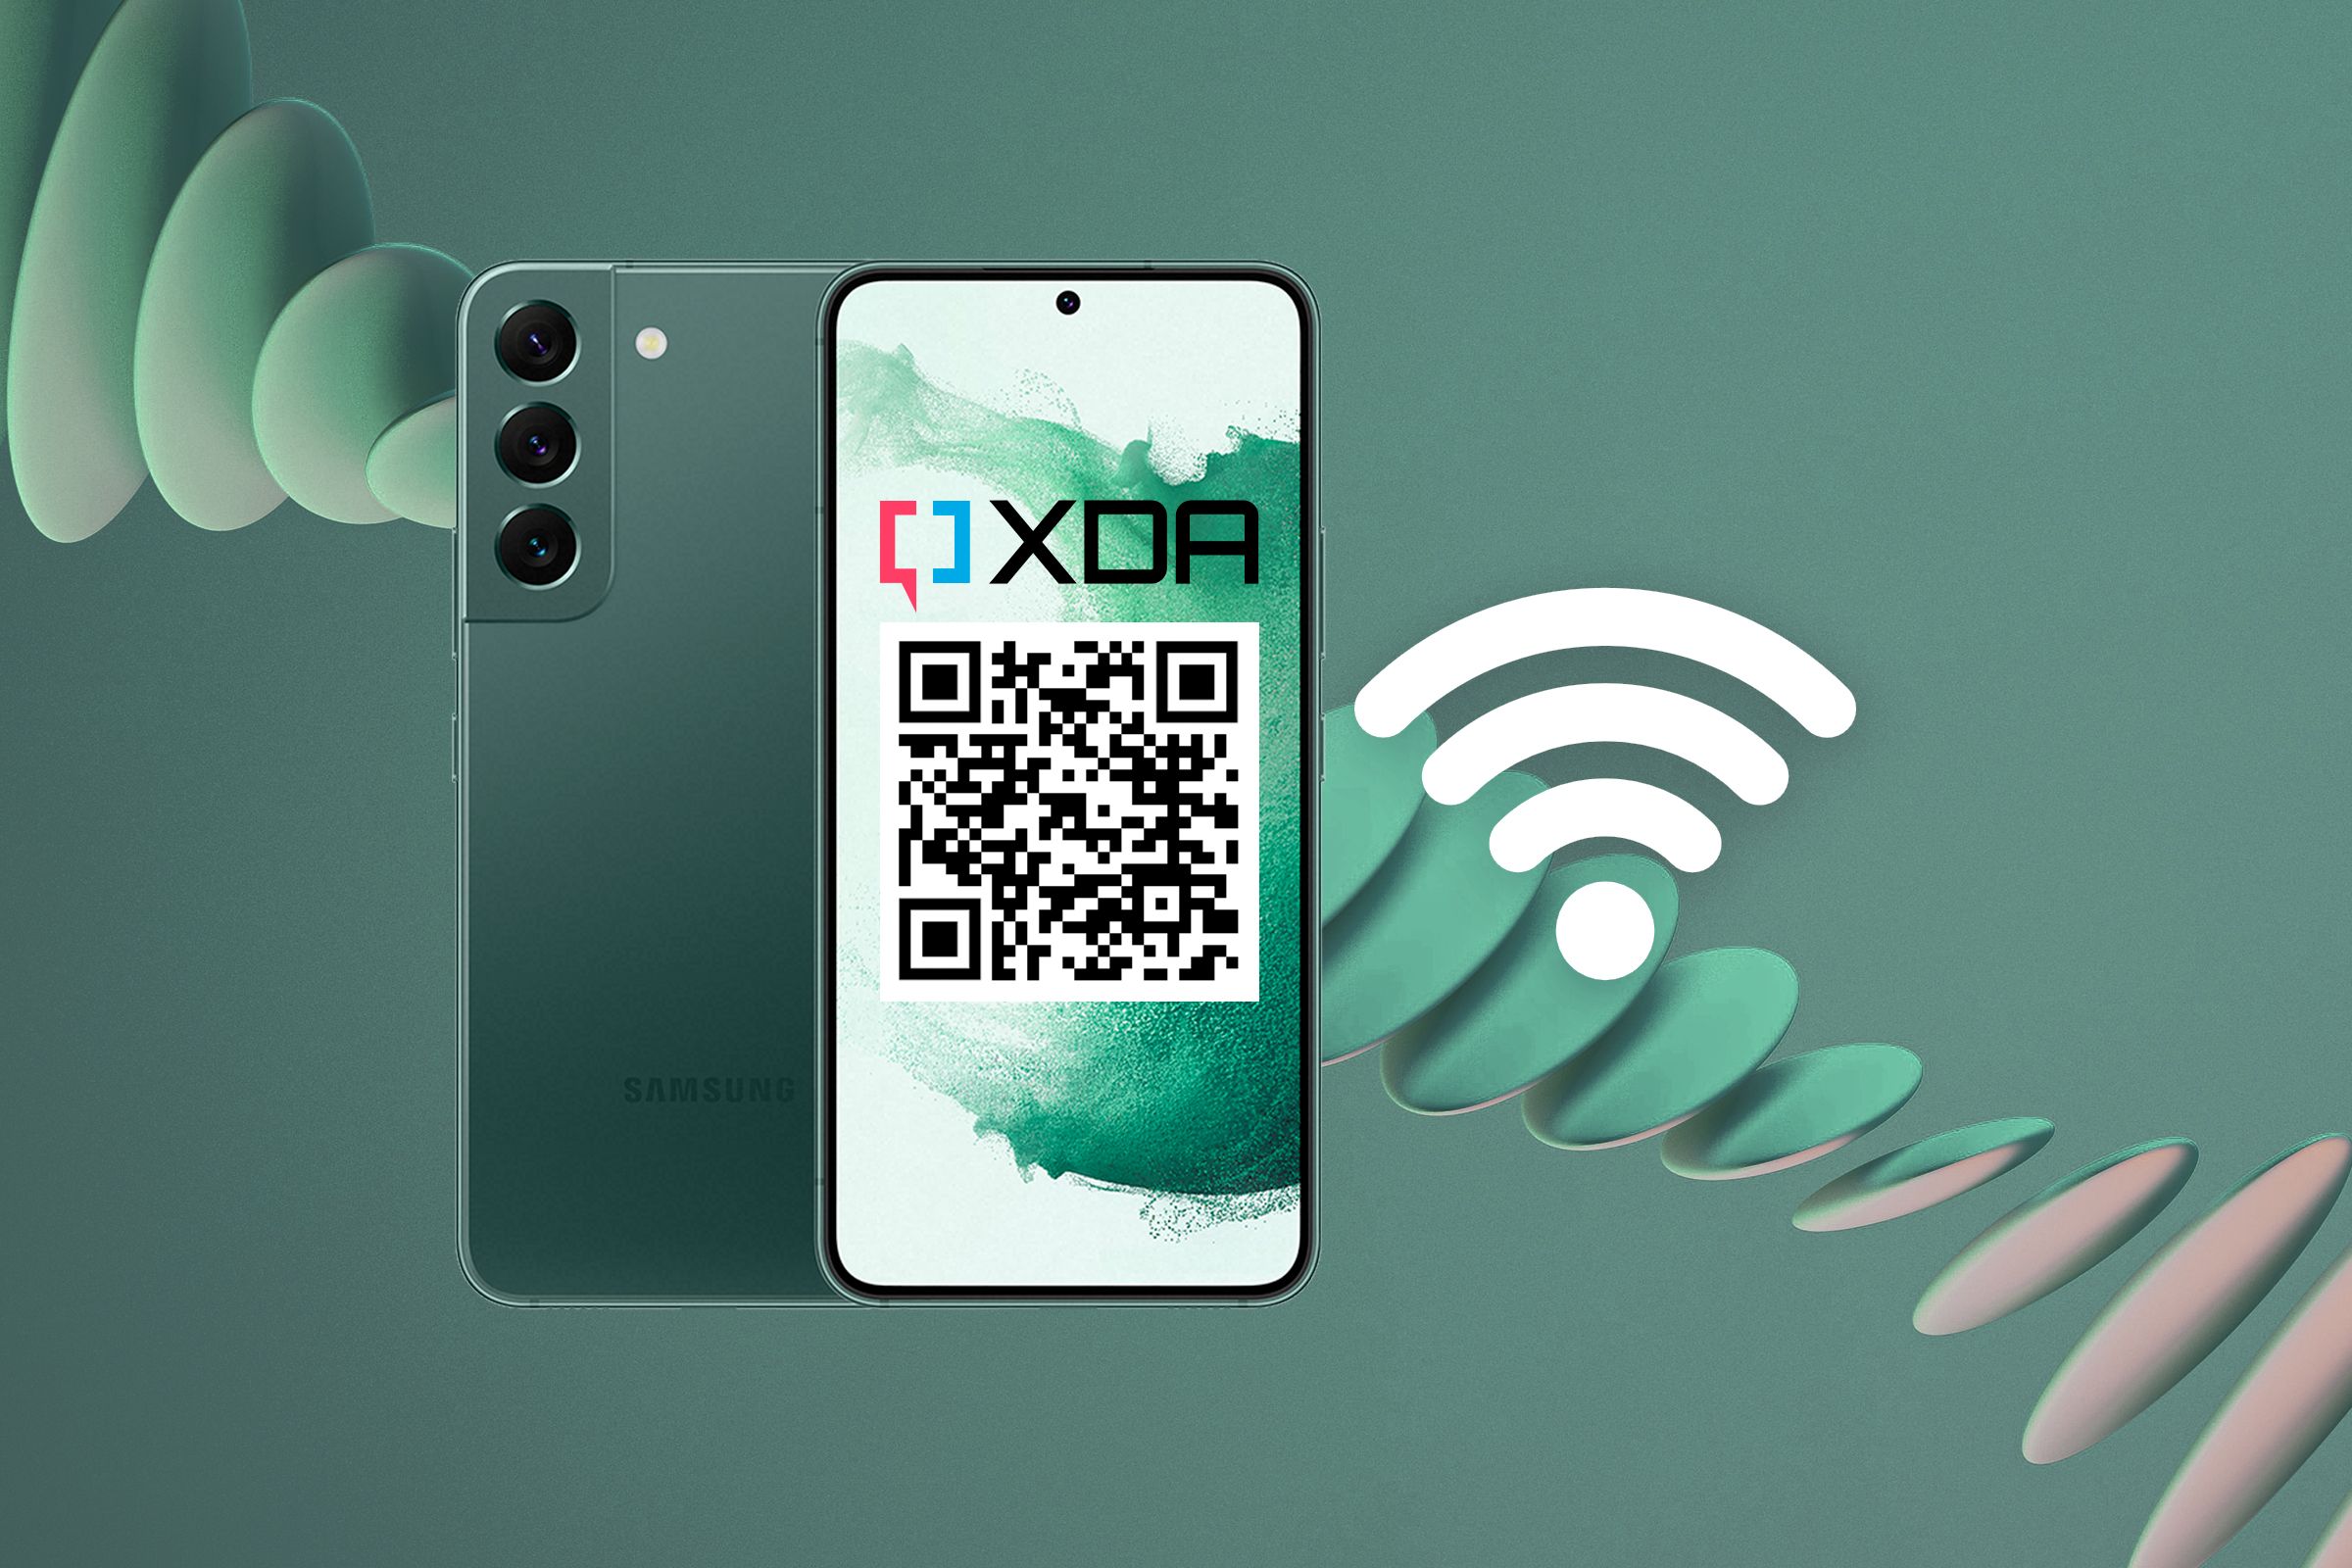 A render of the Samsung Galaxy S22 showing the XDA logo and a QR code to illustrate Wi-Fi password sharing features in Android.